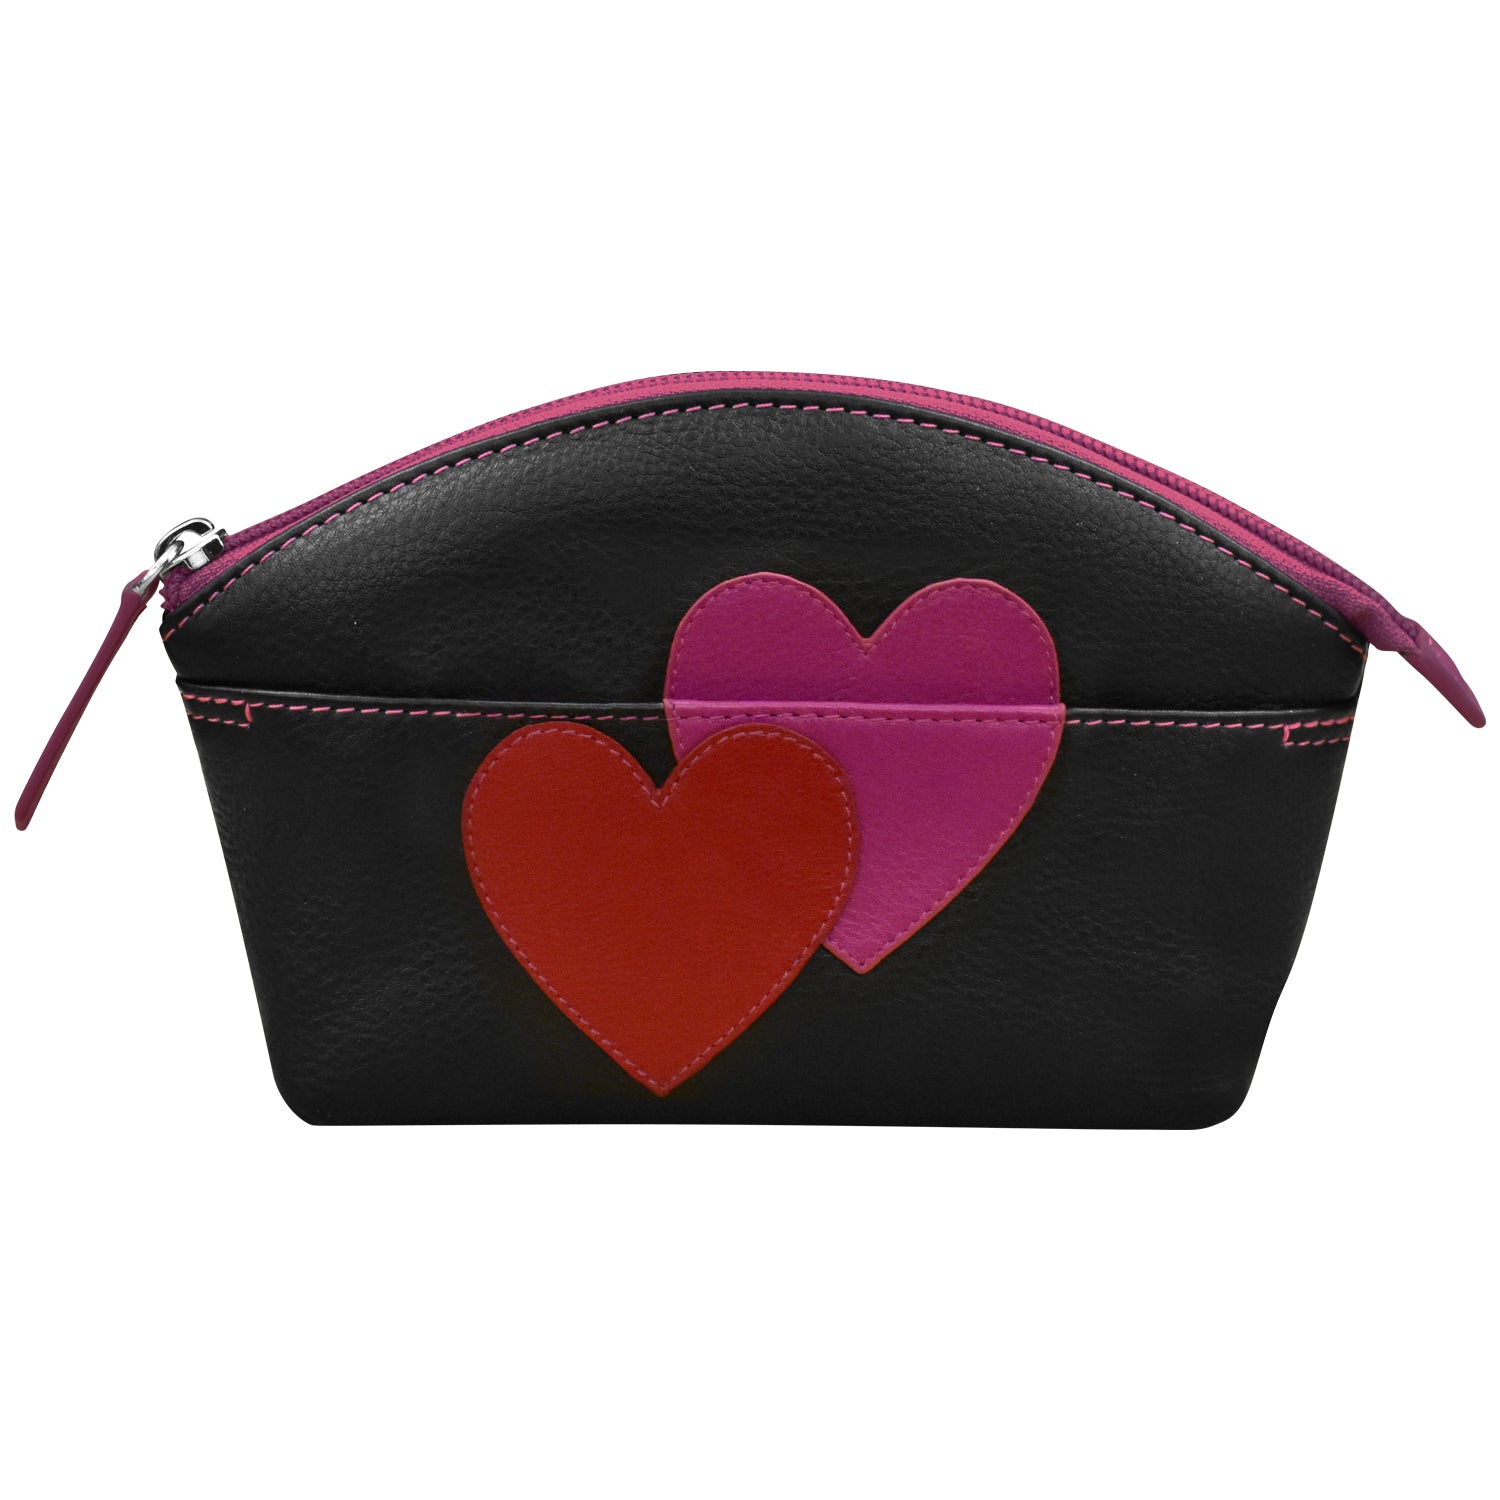 Hearts Makeup Bags, Cosmetic Travel Pouches in 2 Sizes (Black, 2